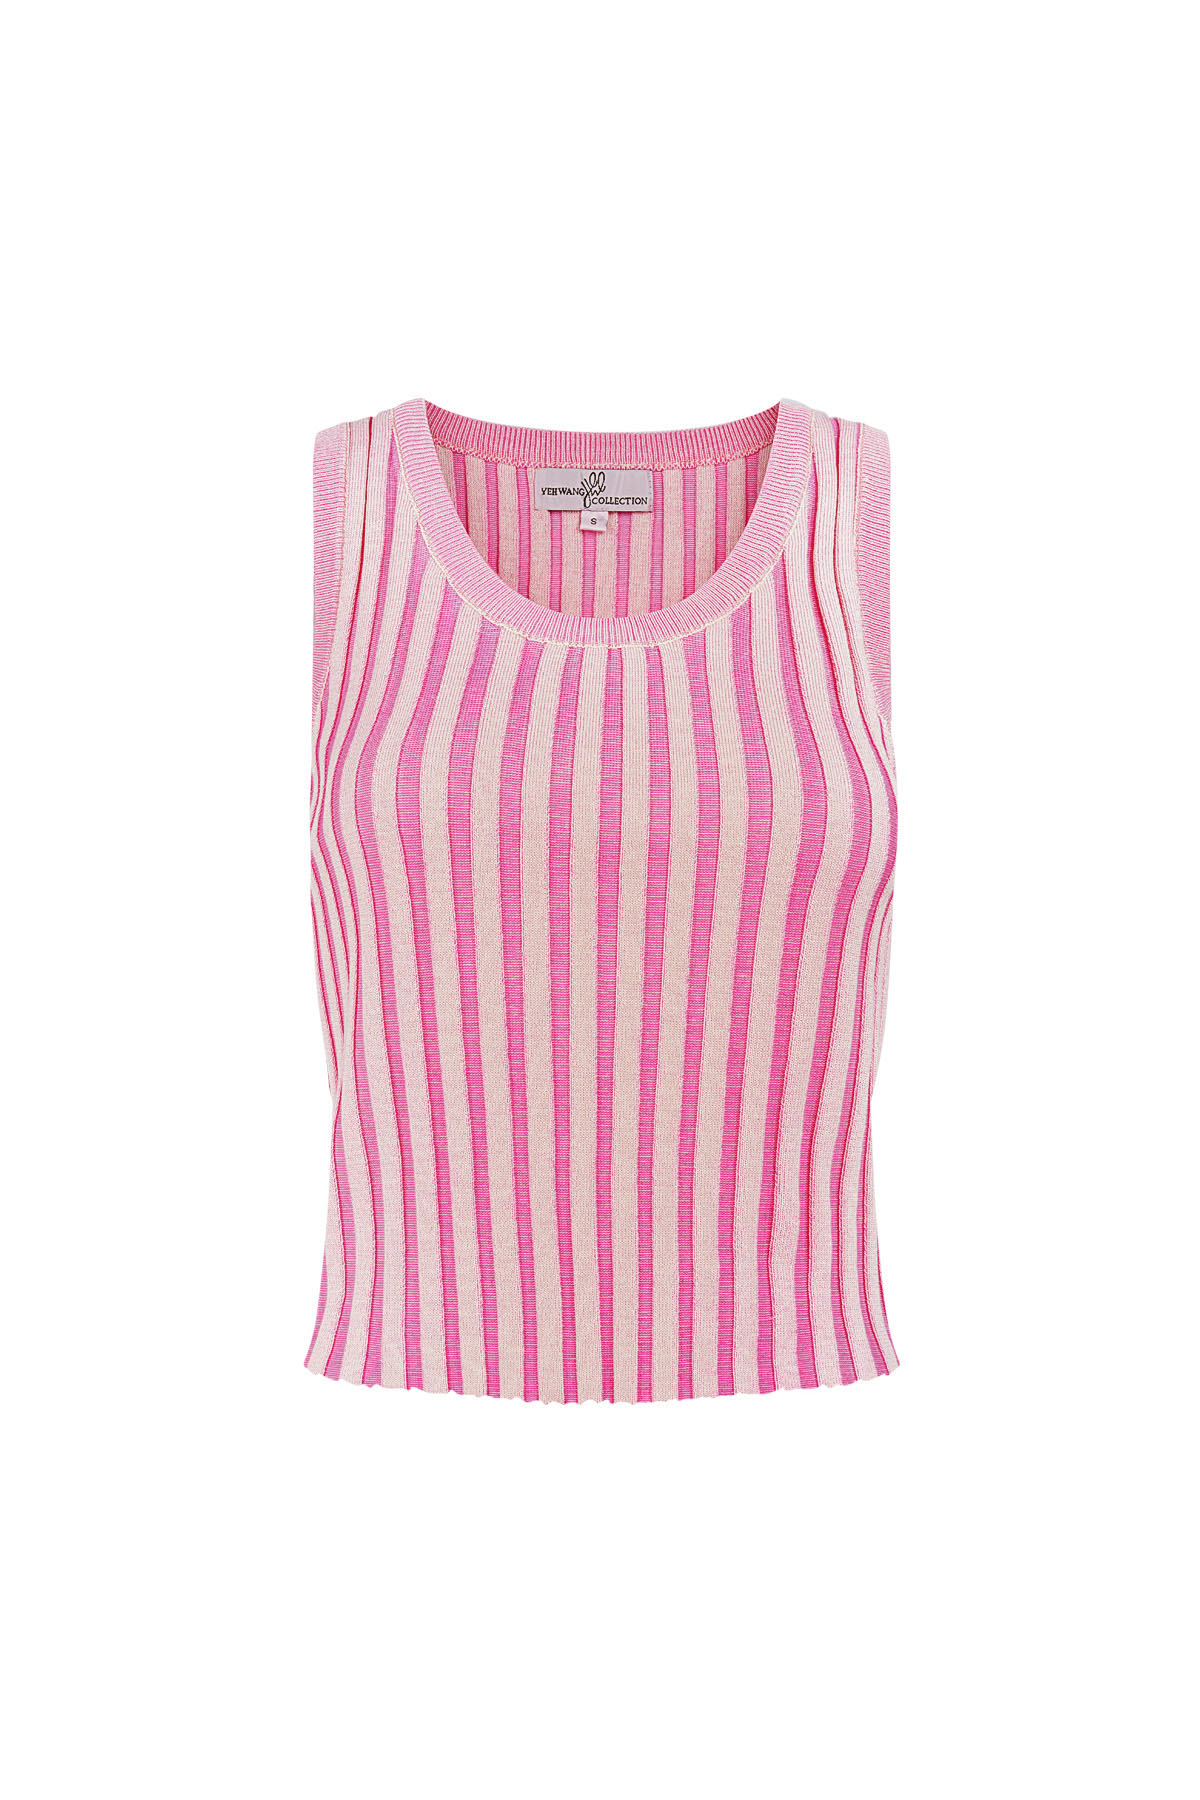 Top rayé sans manches small – rose